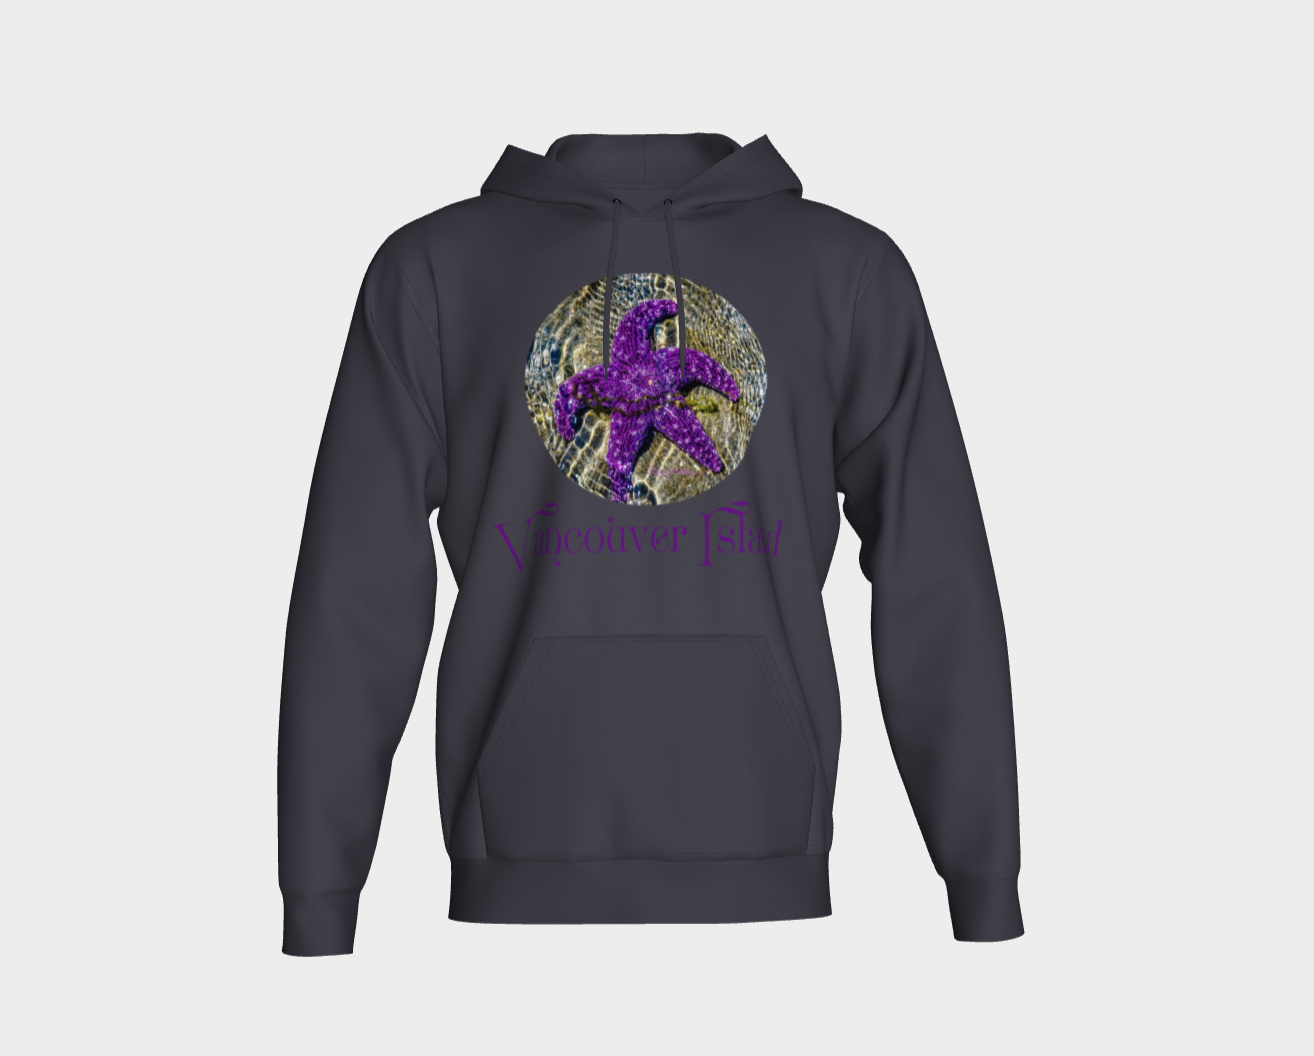 Last Day In May Starfish Vancouver Island Unisex Pullover Hoodie Your Van Isle Goddess unisex pullover hoodie is a great classic hoodie!  Created with state of the art tri-tex material which is a non-shrink poly middle encased in two layers of ultra soft cotton face and lining.